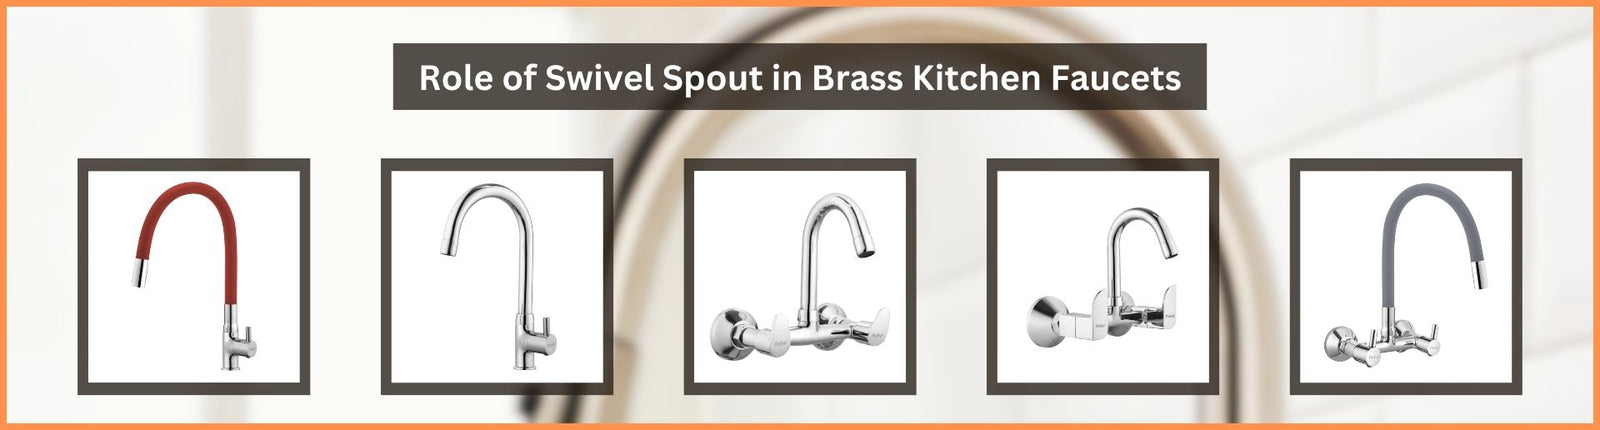 Role of Swivel Spout in Brass Kitchen Faucets